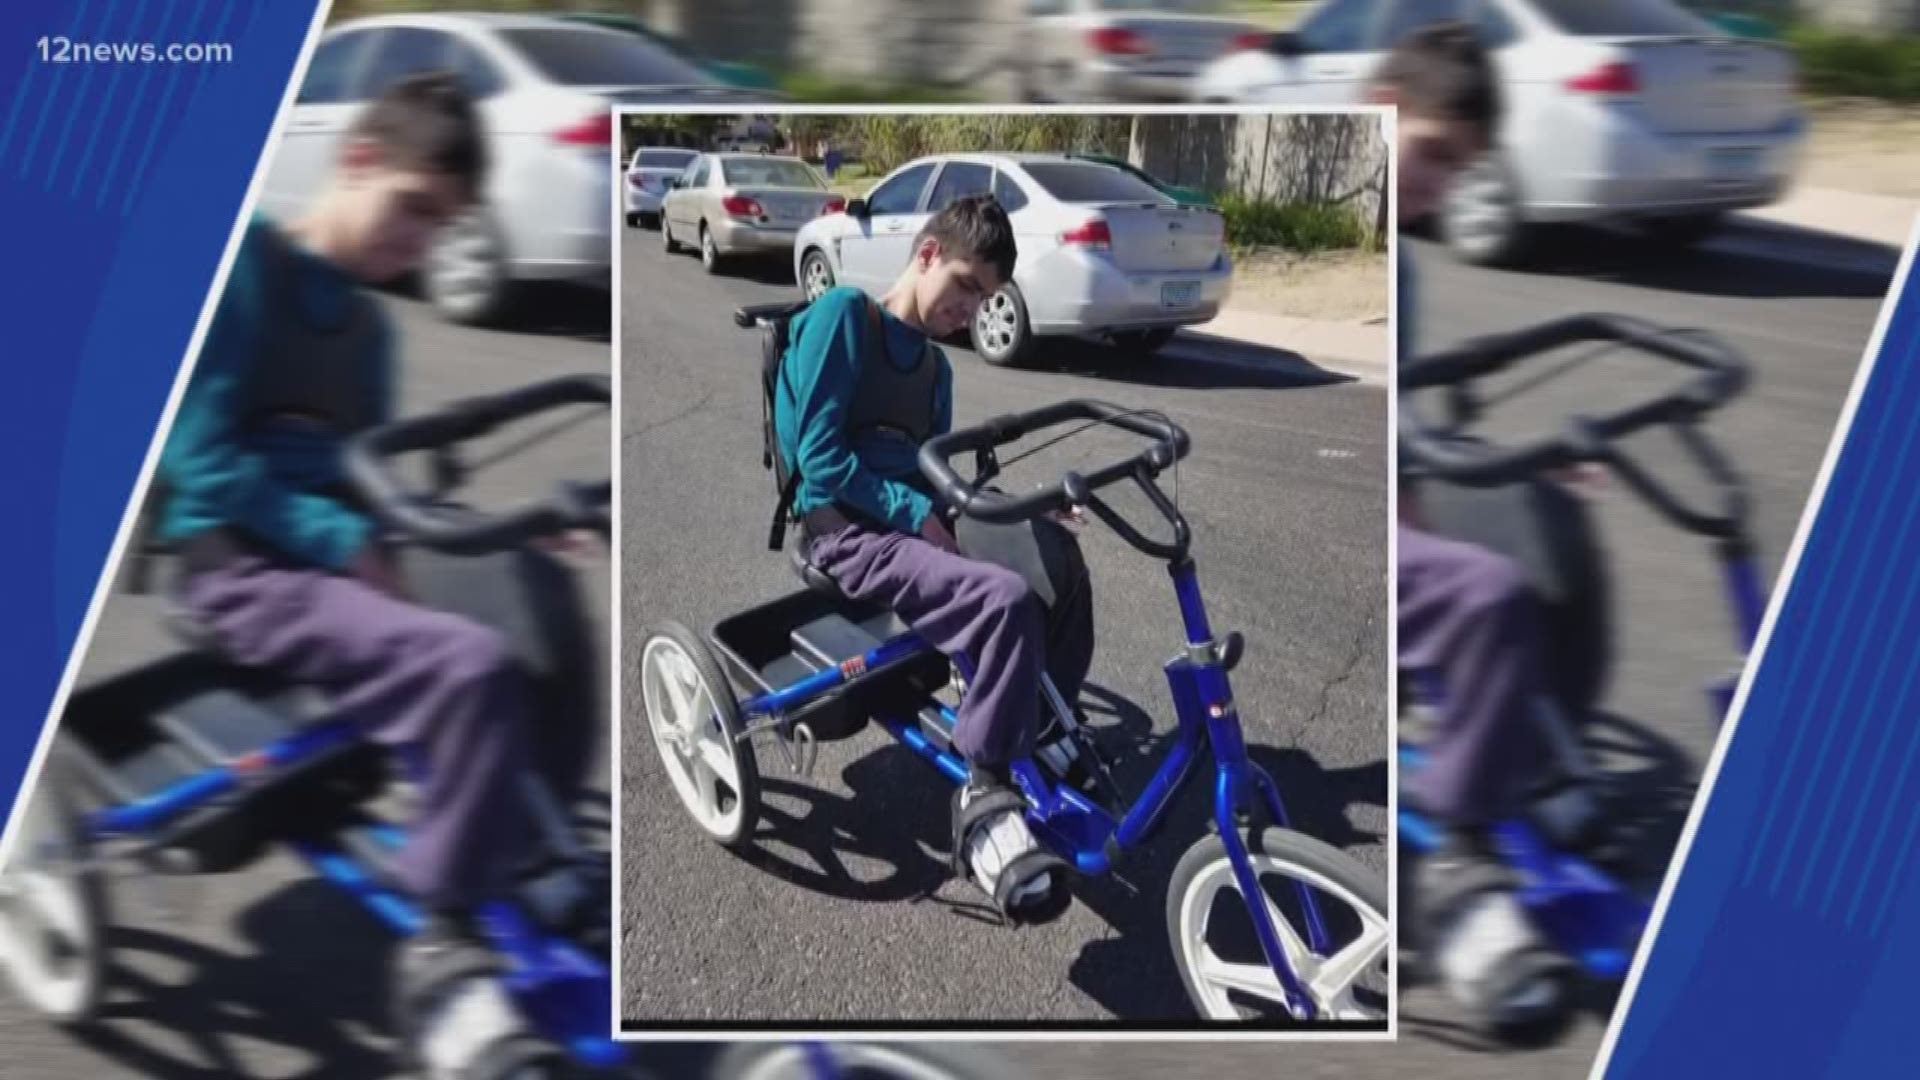 A Valley teen with special needs will get to ride a bike designed for him once again. AMS Vans employees saw the story and decided to help the family get a new bike ordered.